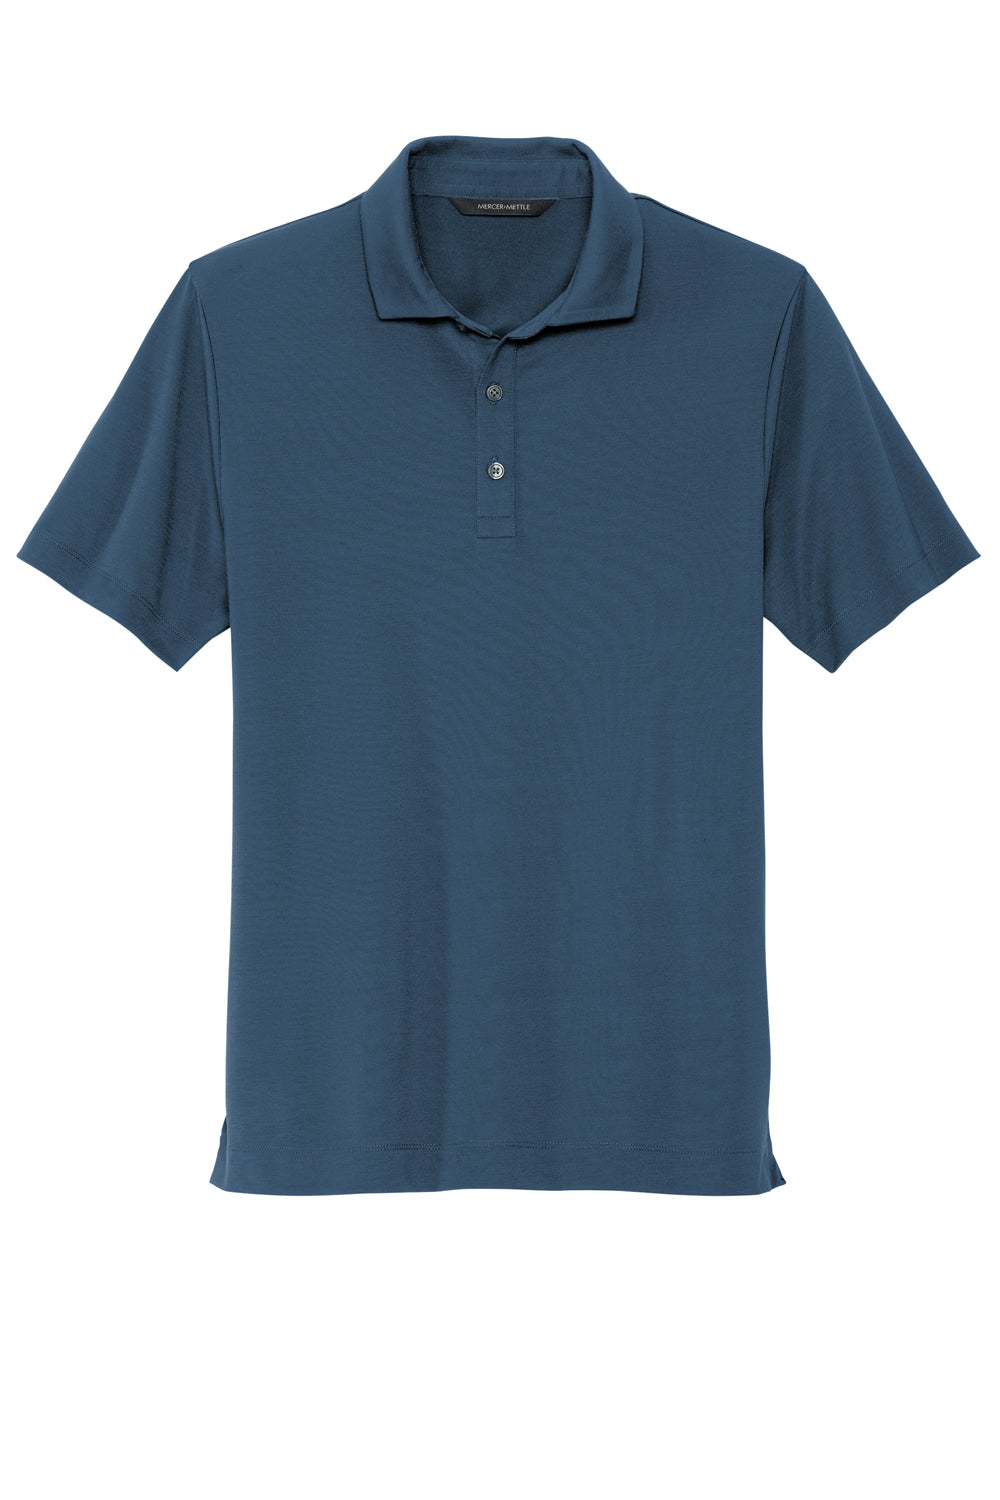 Mercer+Mettle MM1014 Stretch Jersey Short Sleeve Polo Shirt Insignia Blue Flat Front